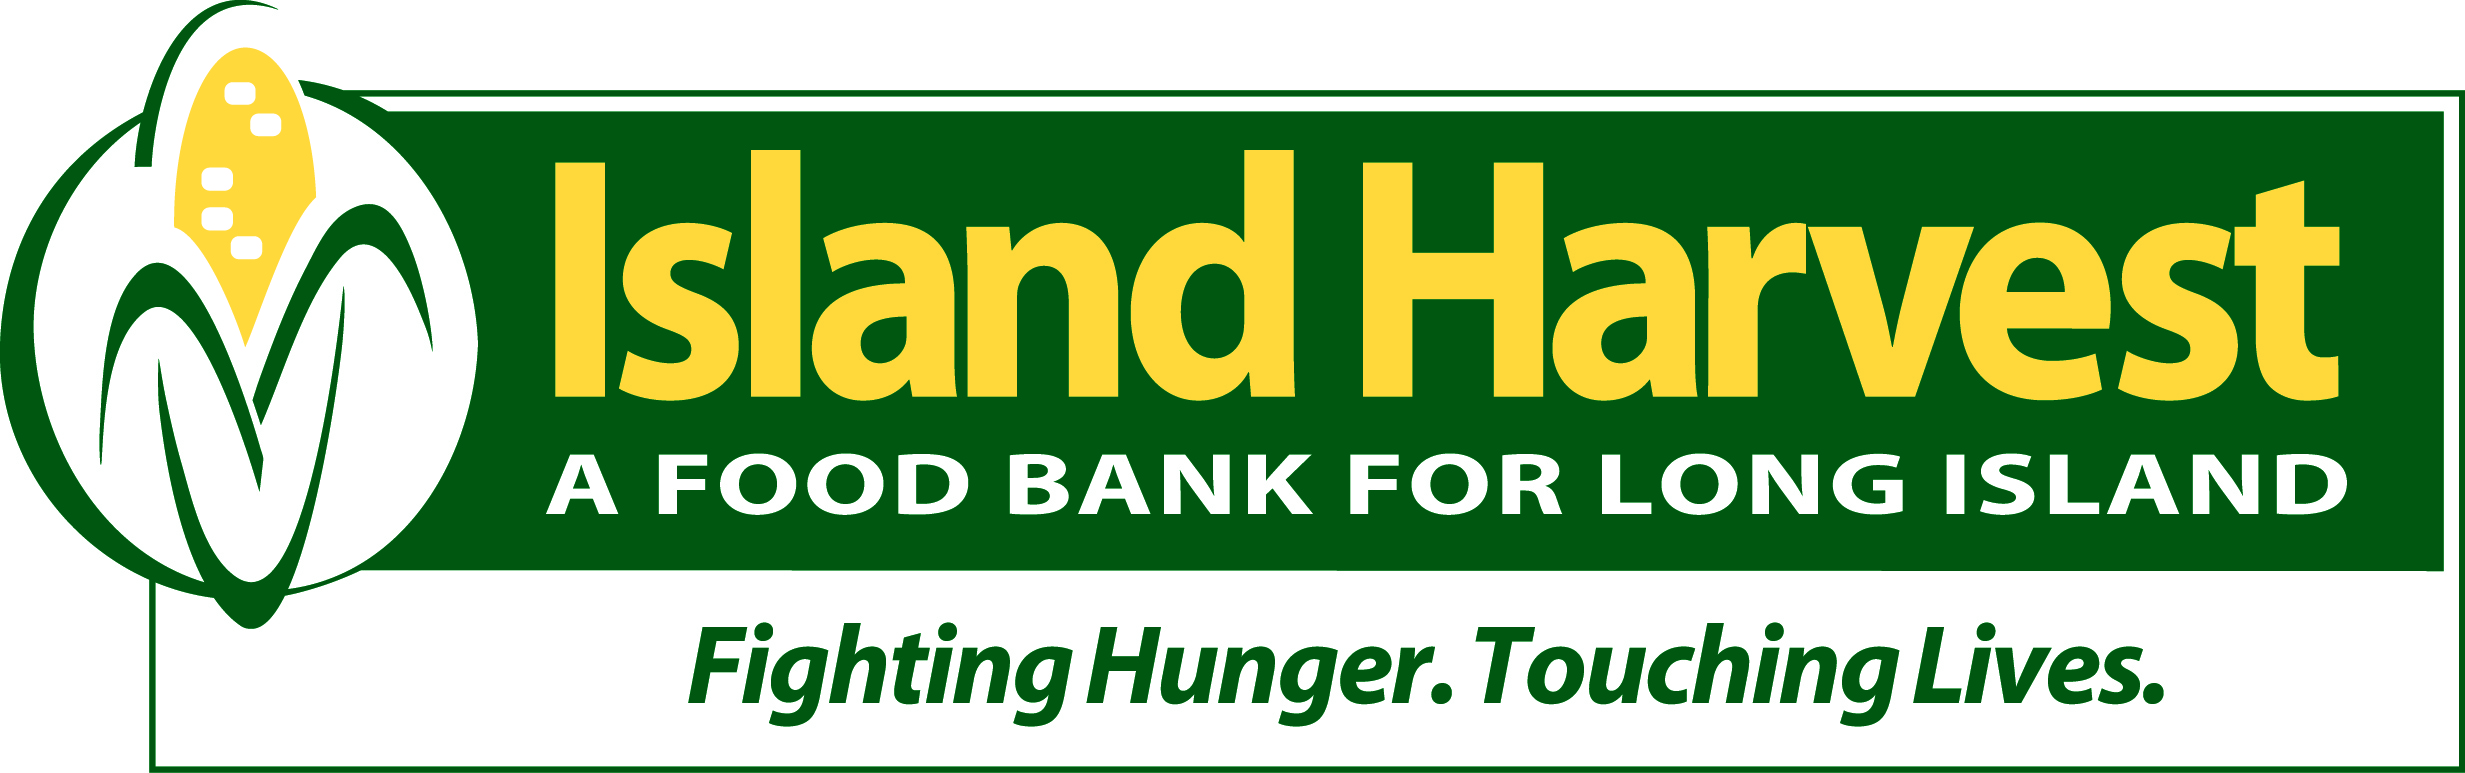 Island Harvest: A Food Bank for Long Island | Fighting Hunger. Touching Lives.